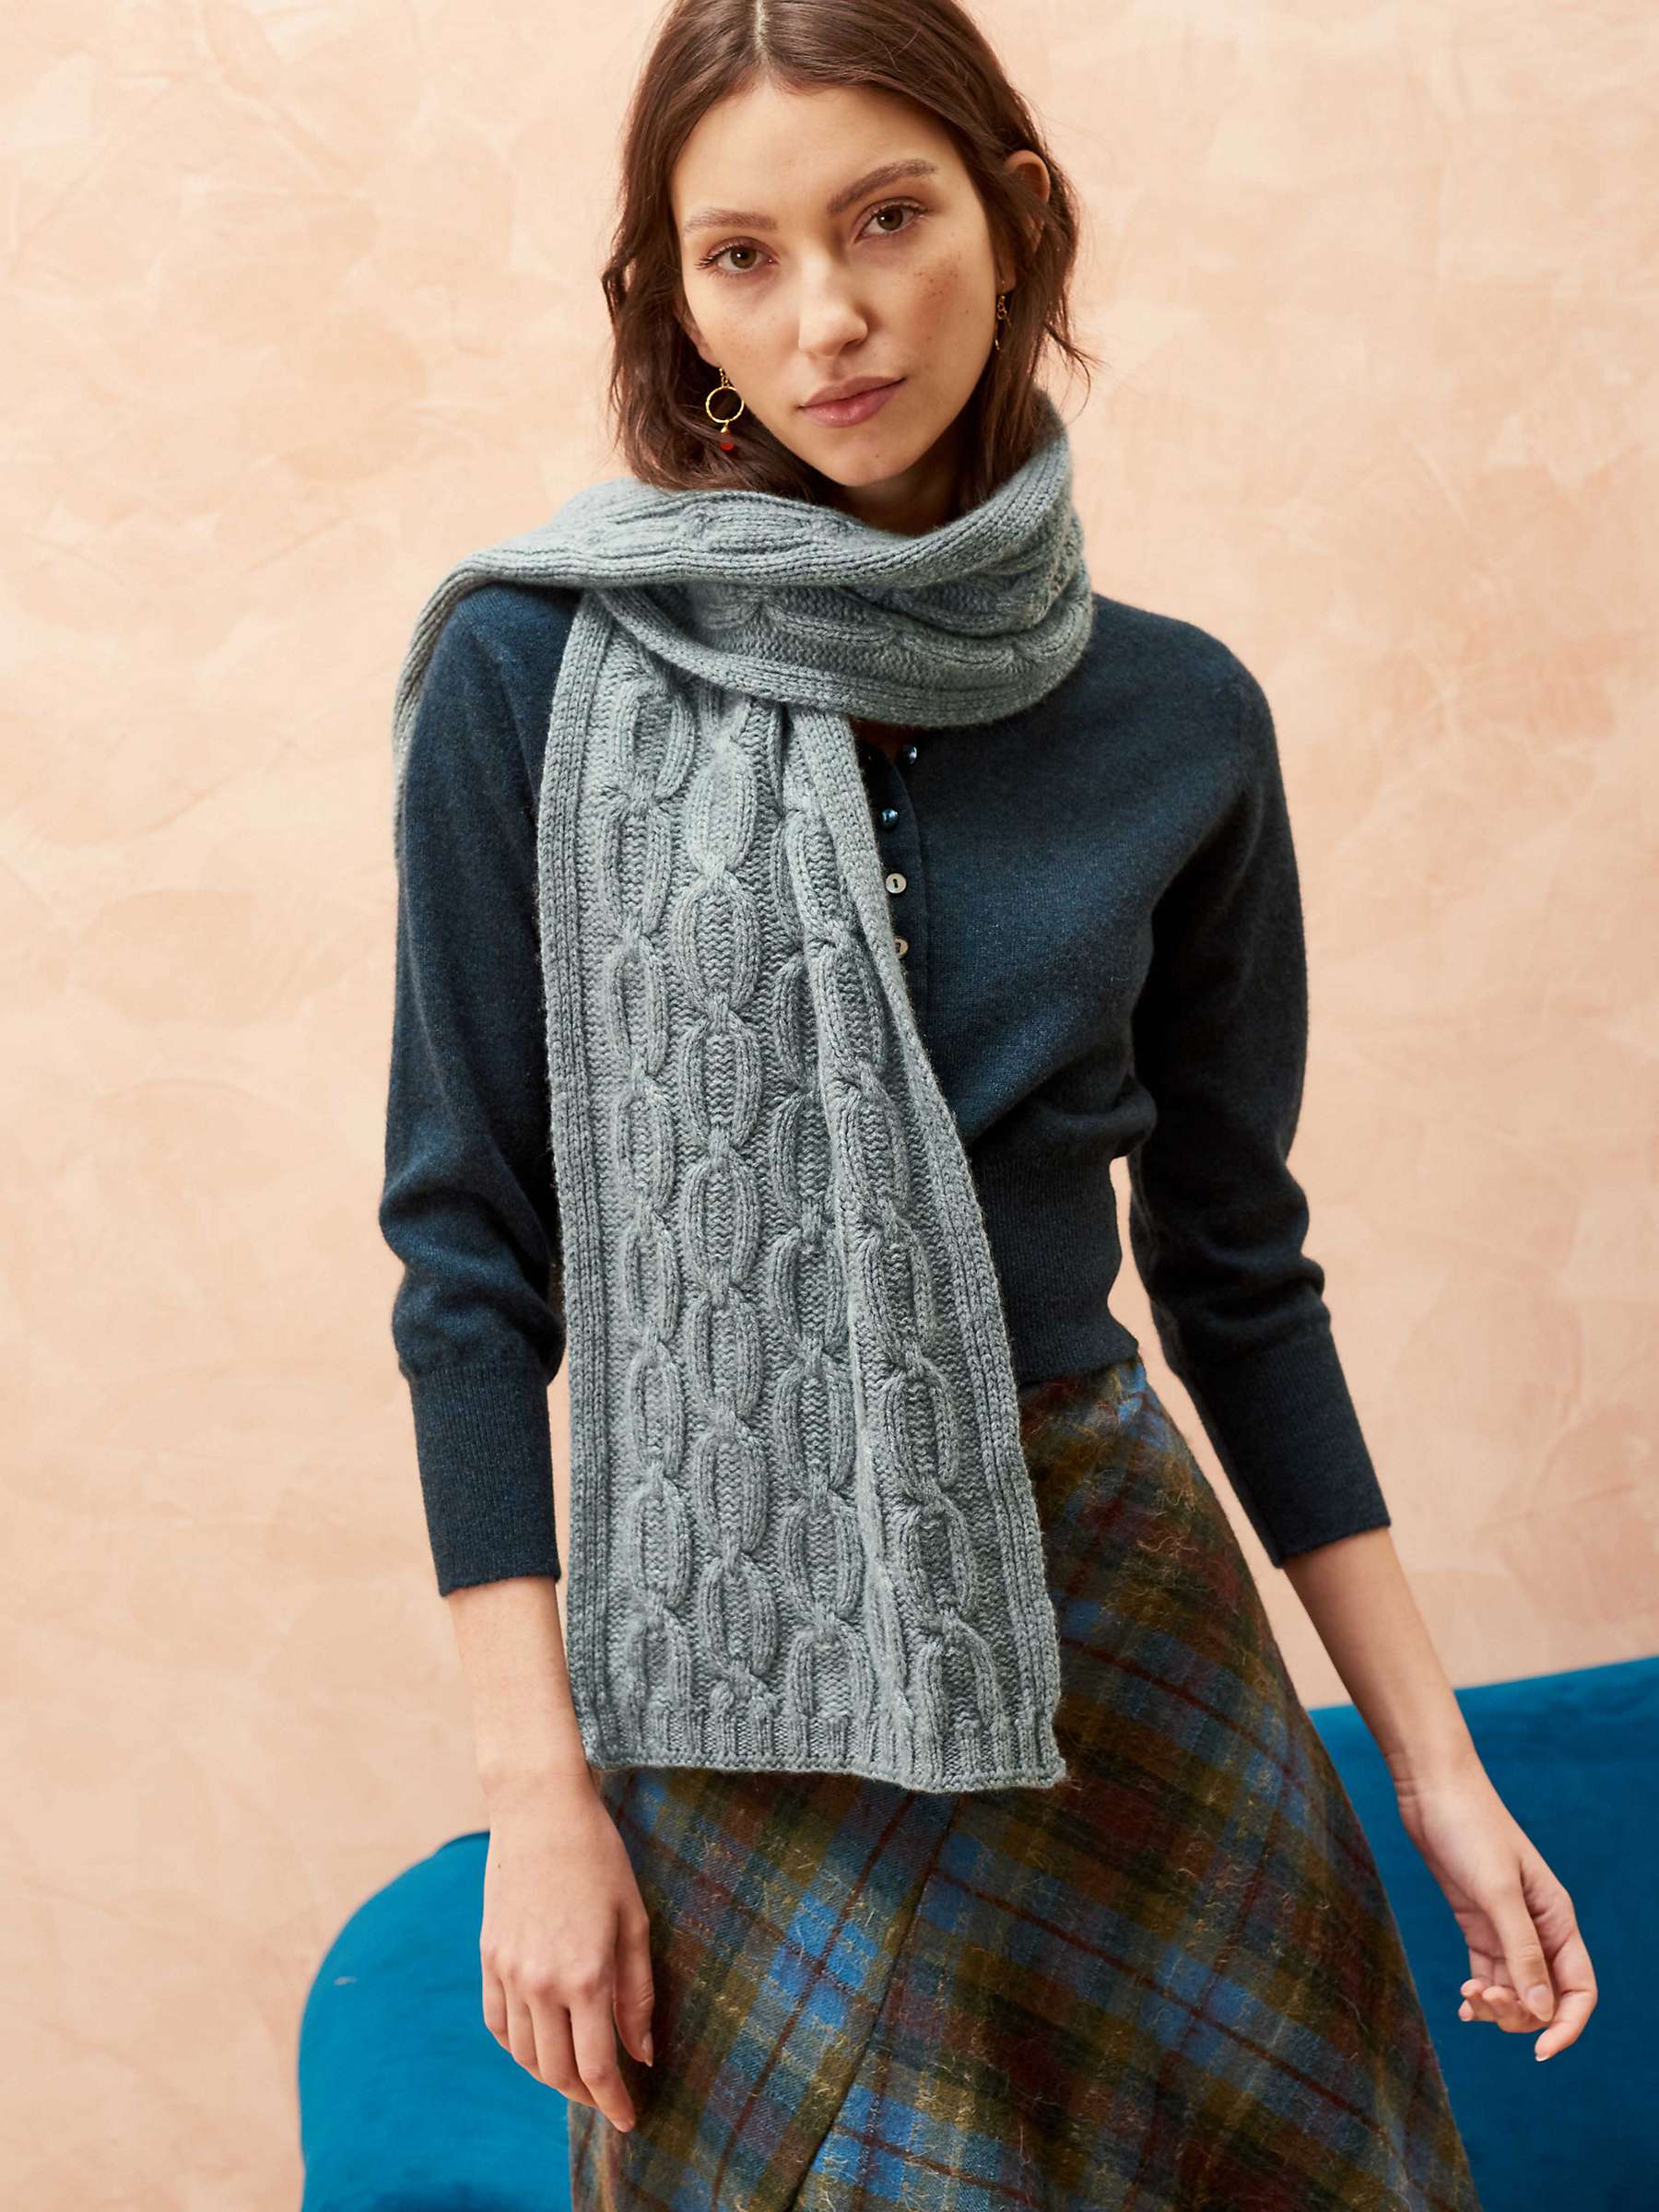 Buy Brora Cashmere Cable Scarf Online at johnlewis.com